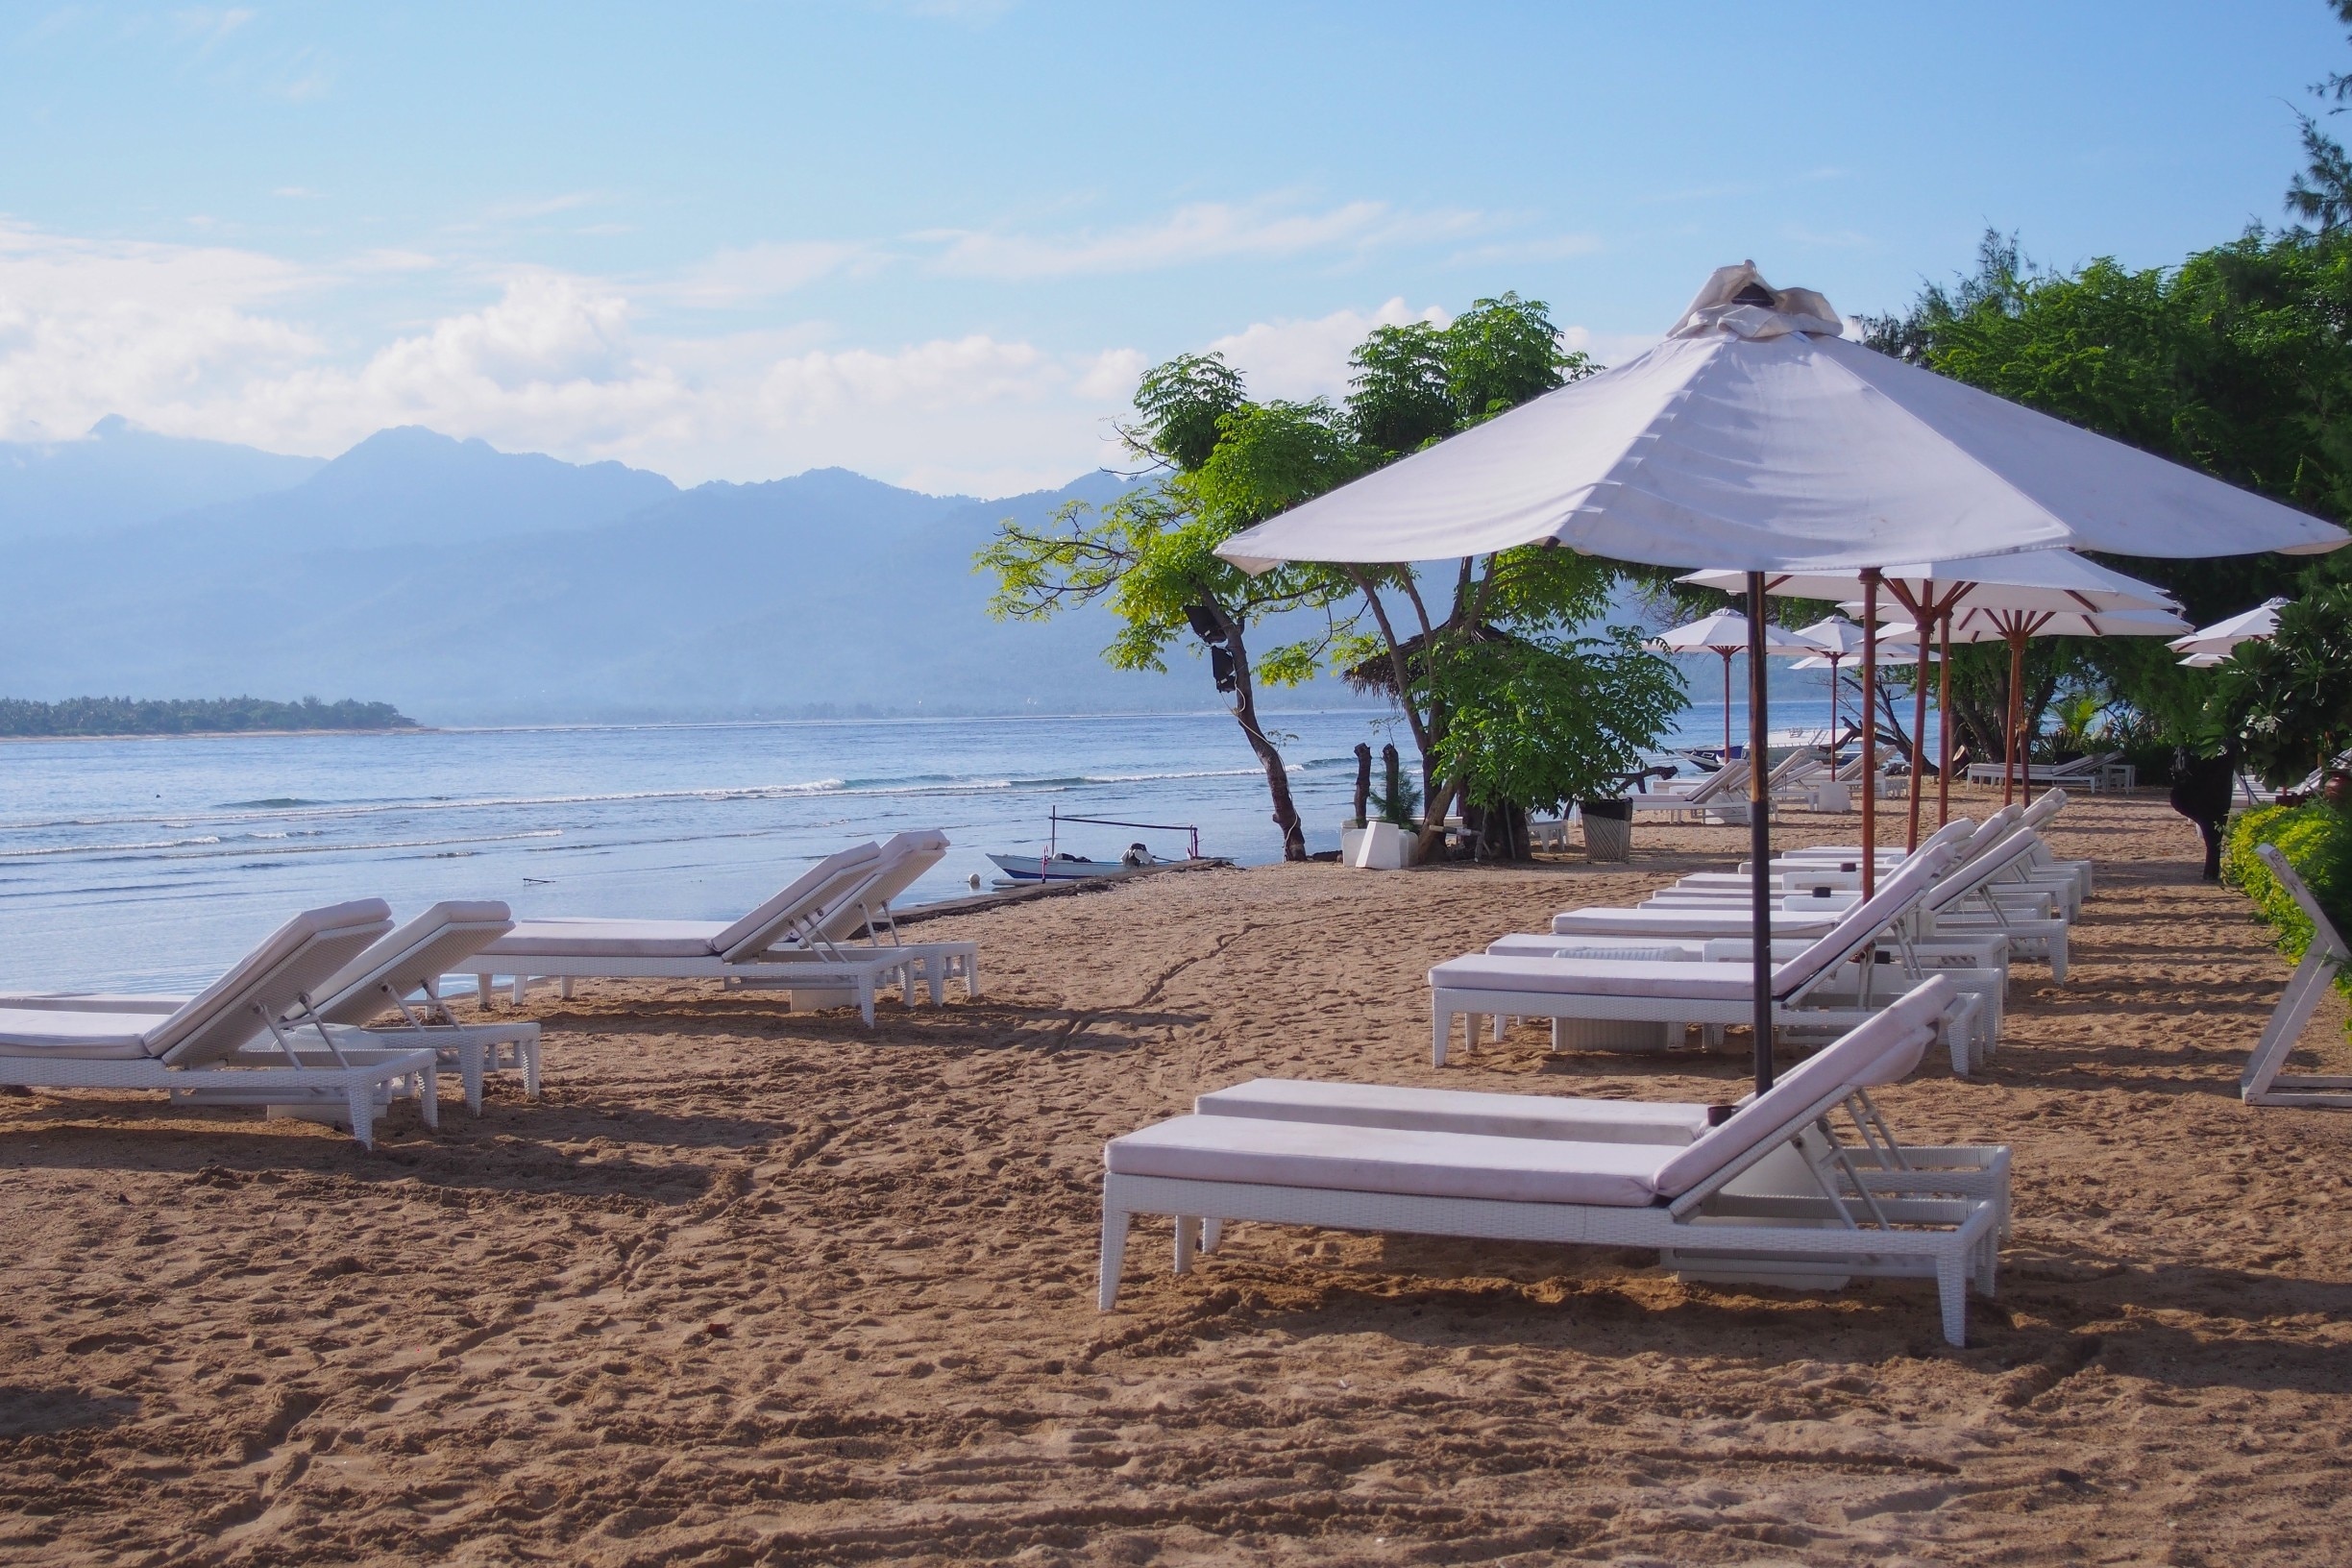 Gili Meno is truly a paradise island situated between Bali and Lombok. The quietest of the three Gilis, it is a great place to esape the traffic of Bali and the parties of Trawangan. 